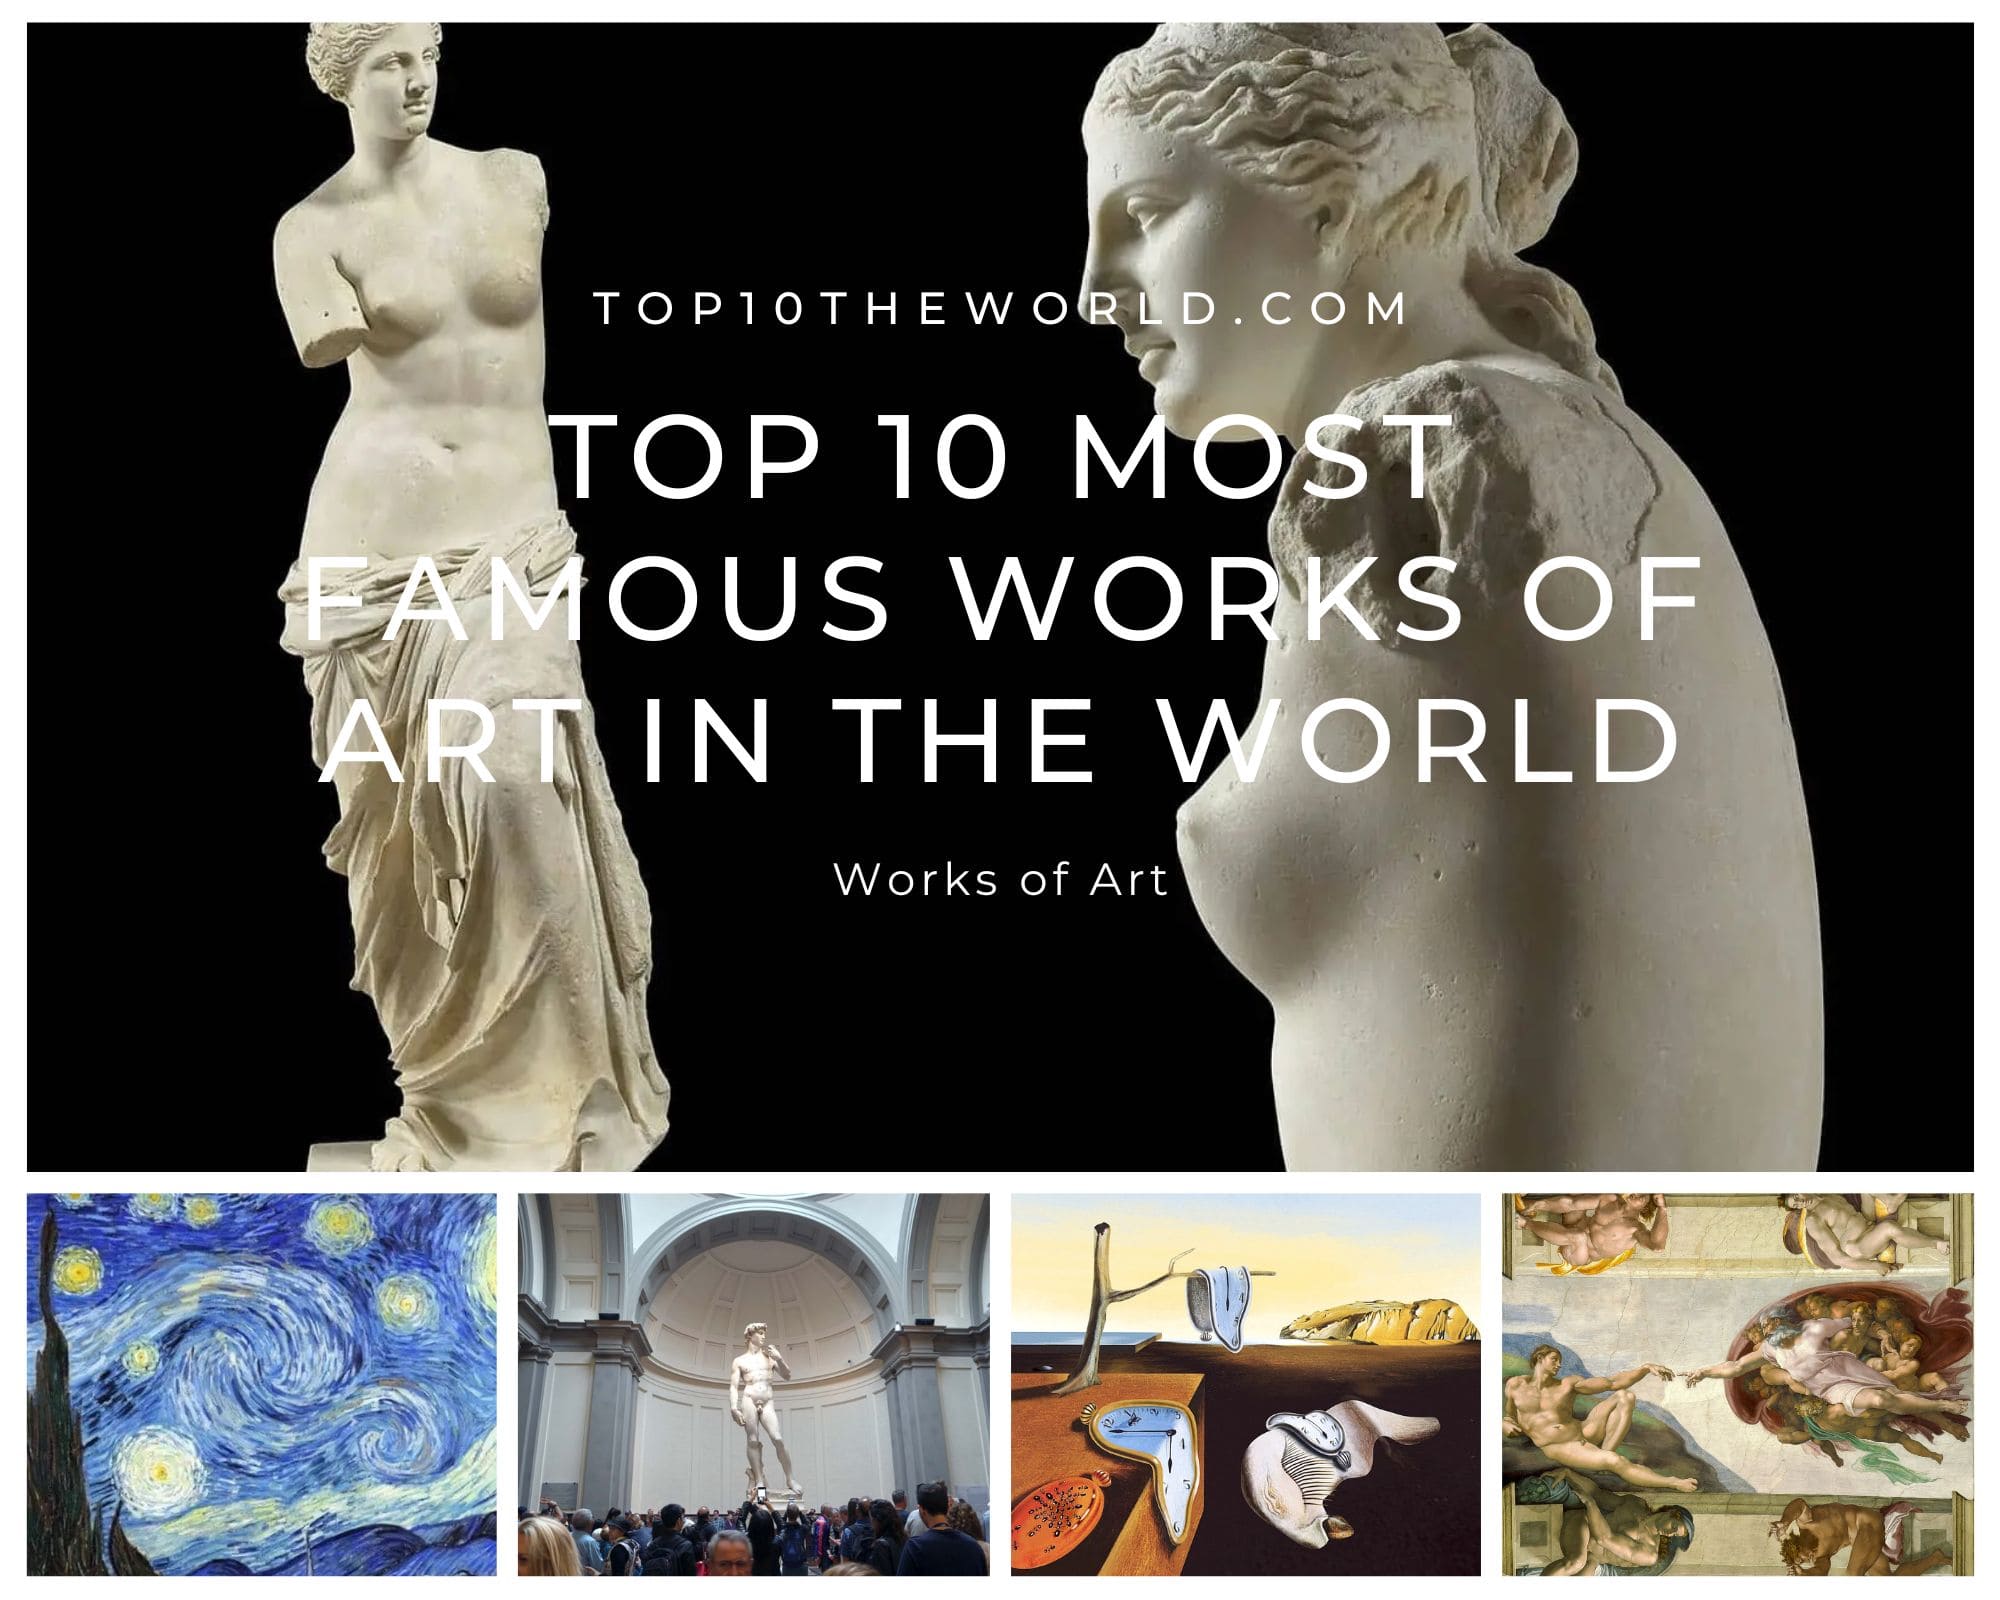 Top 10 Most Famous Works of Art in the world